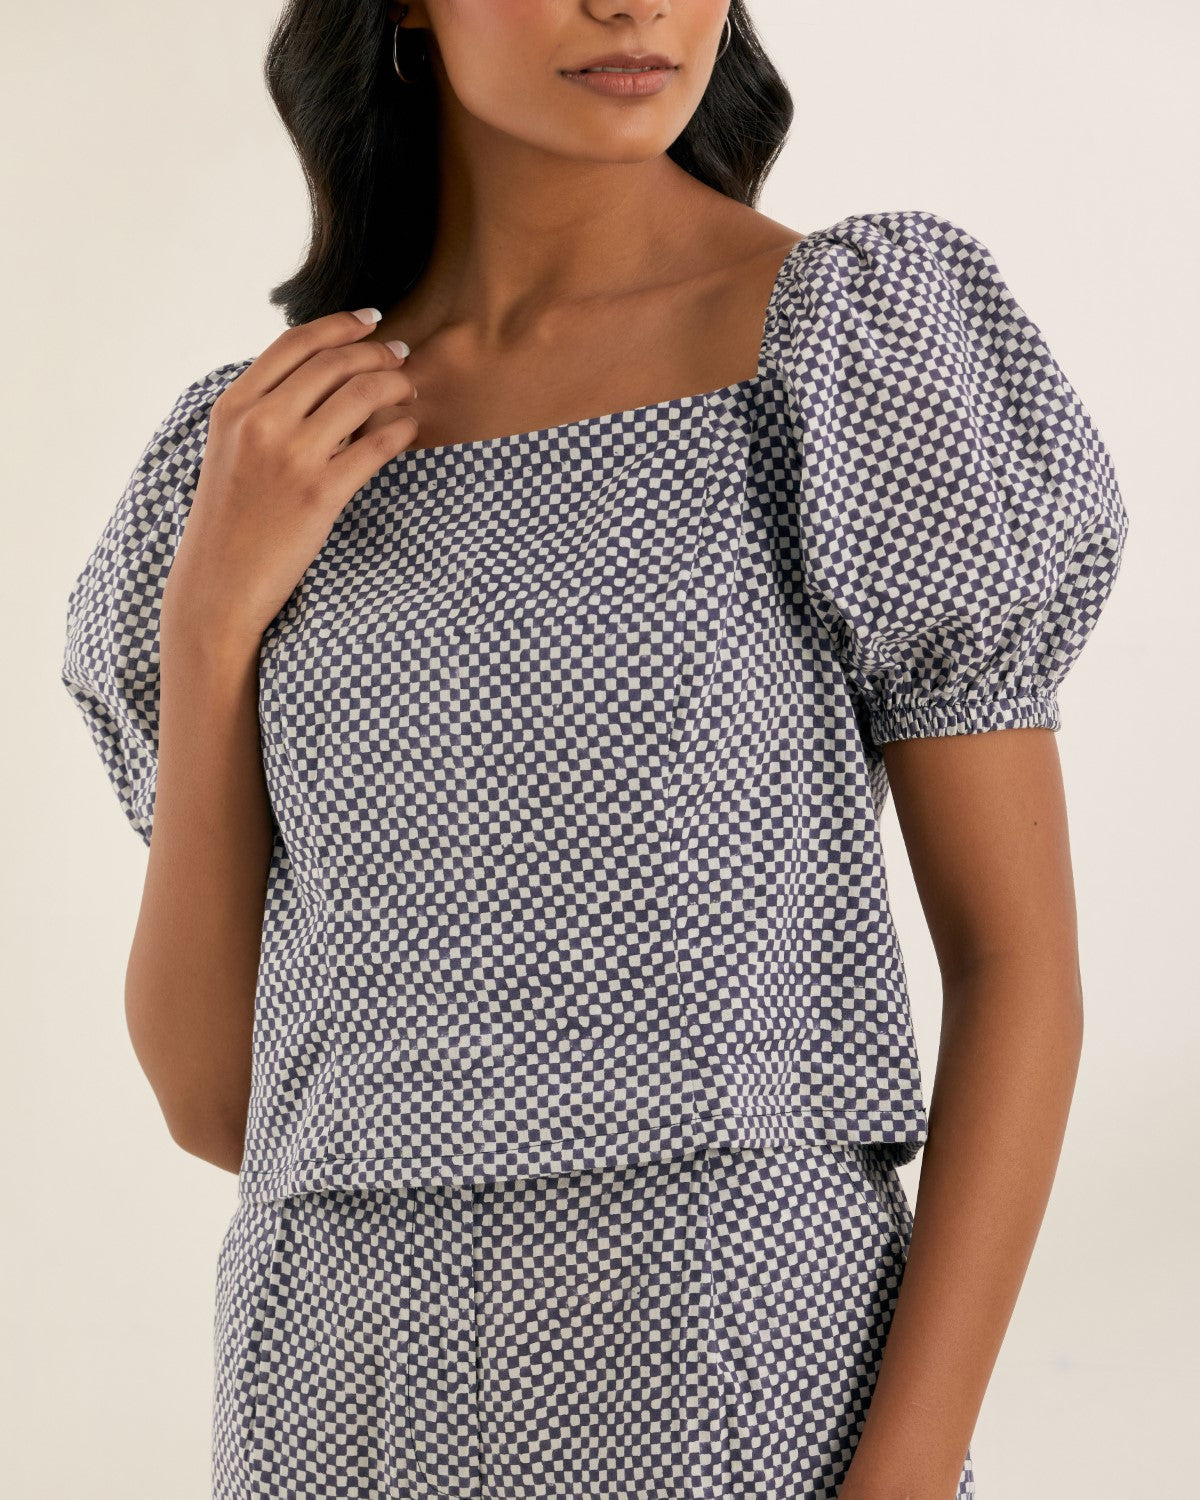 ON SALE- Checkmate- Square neck top with puff sleeves